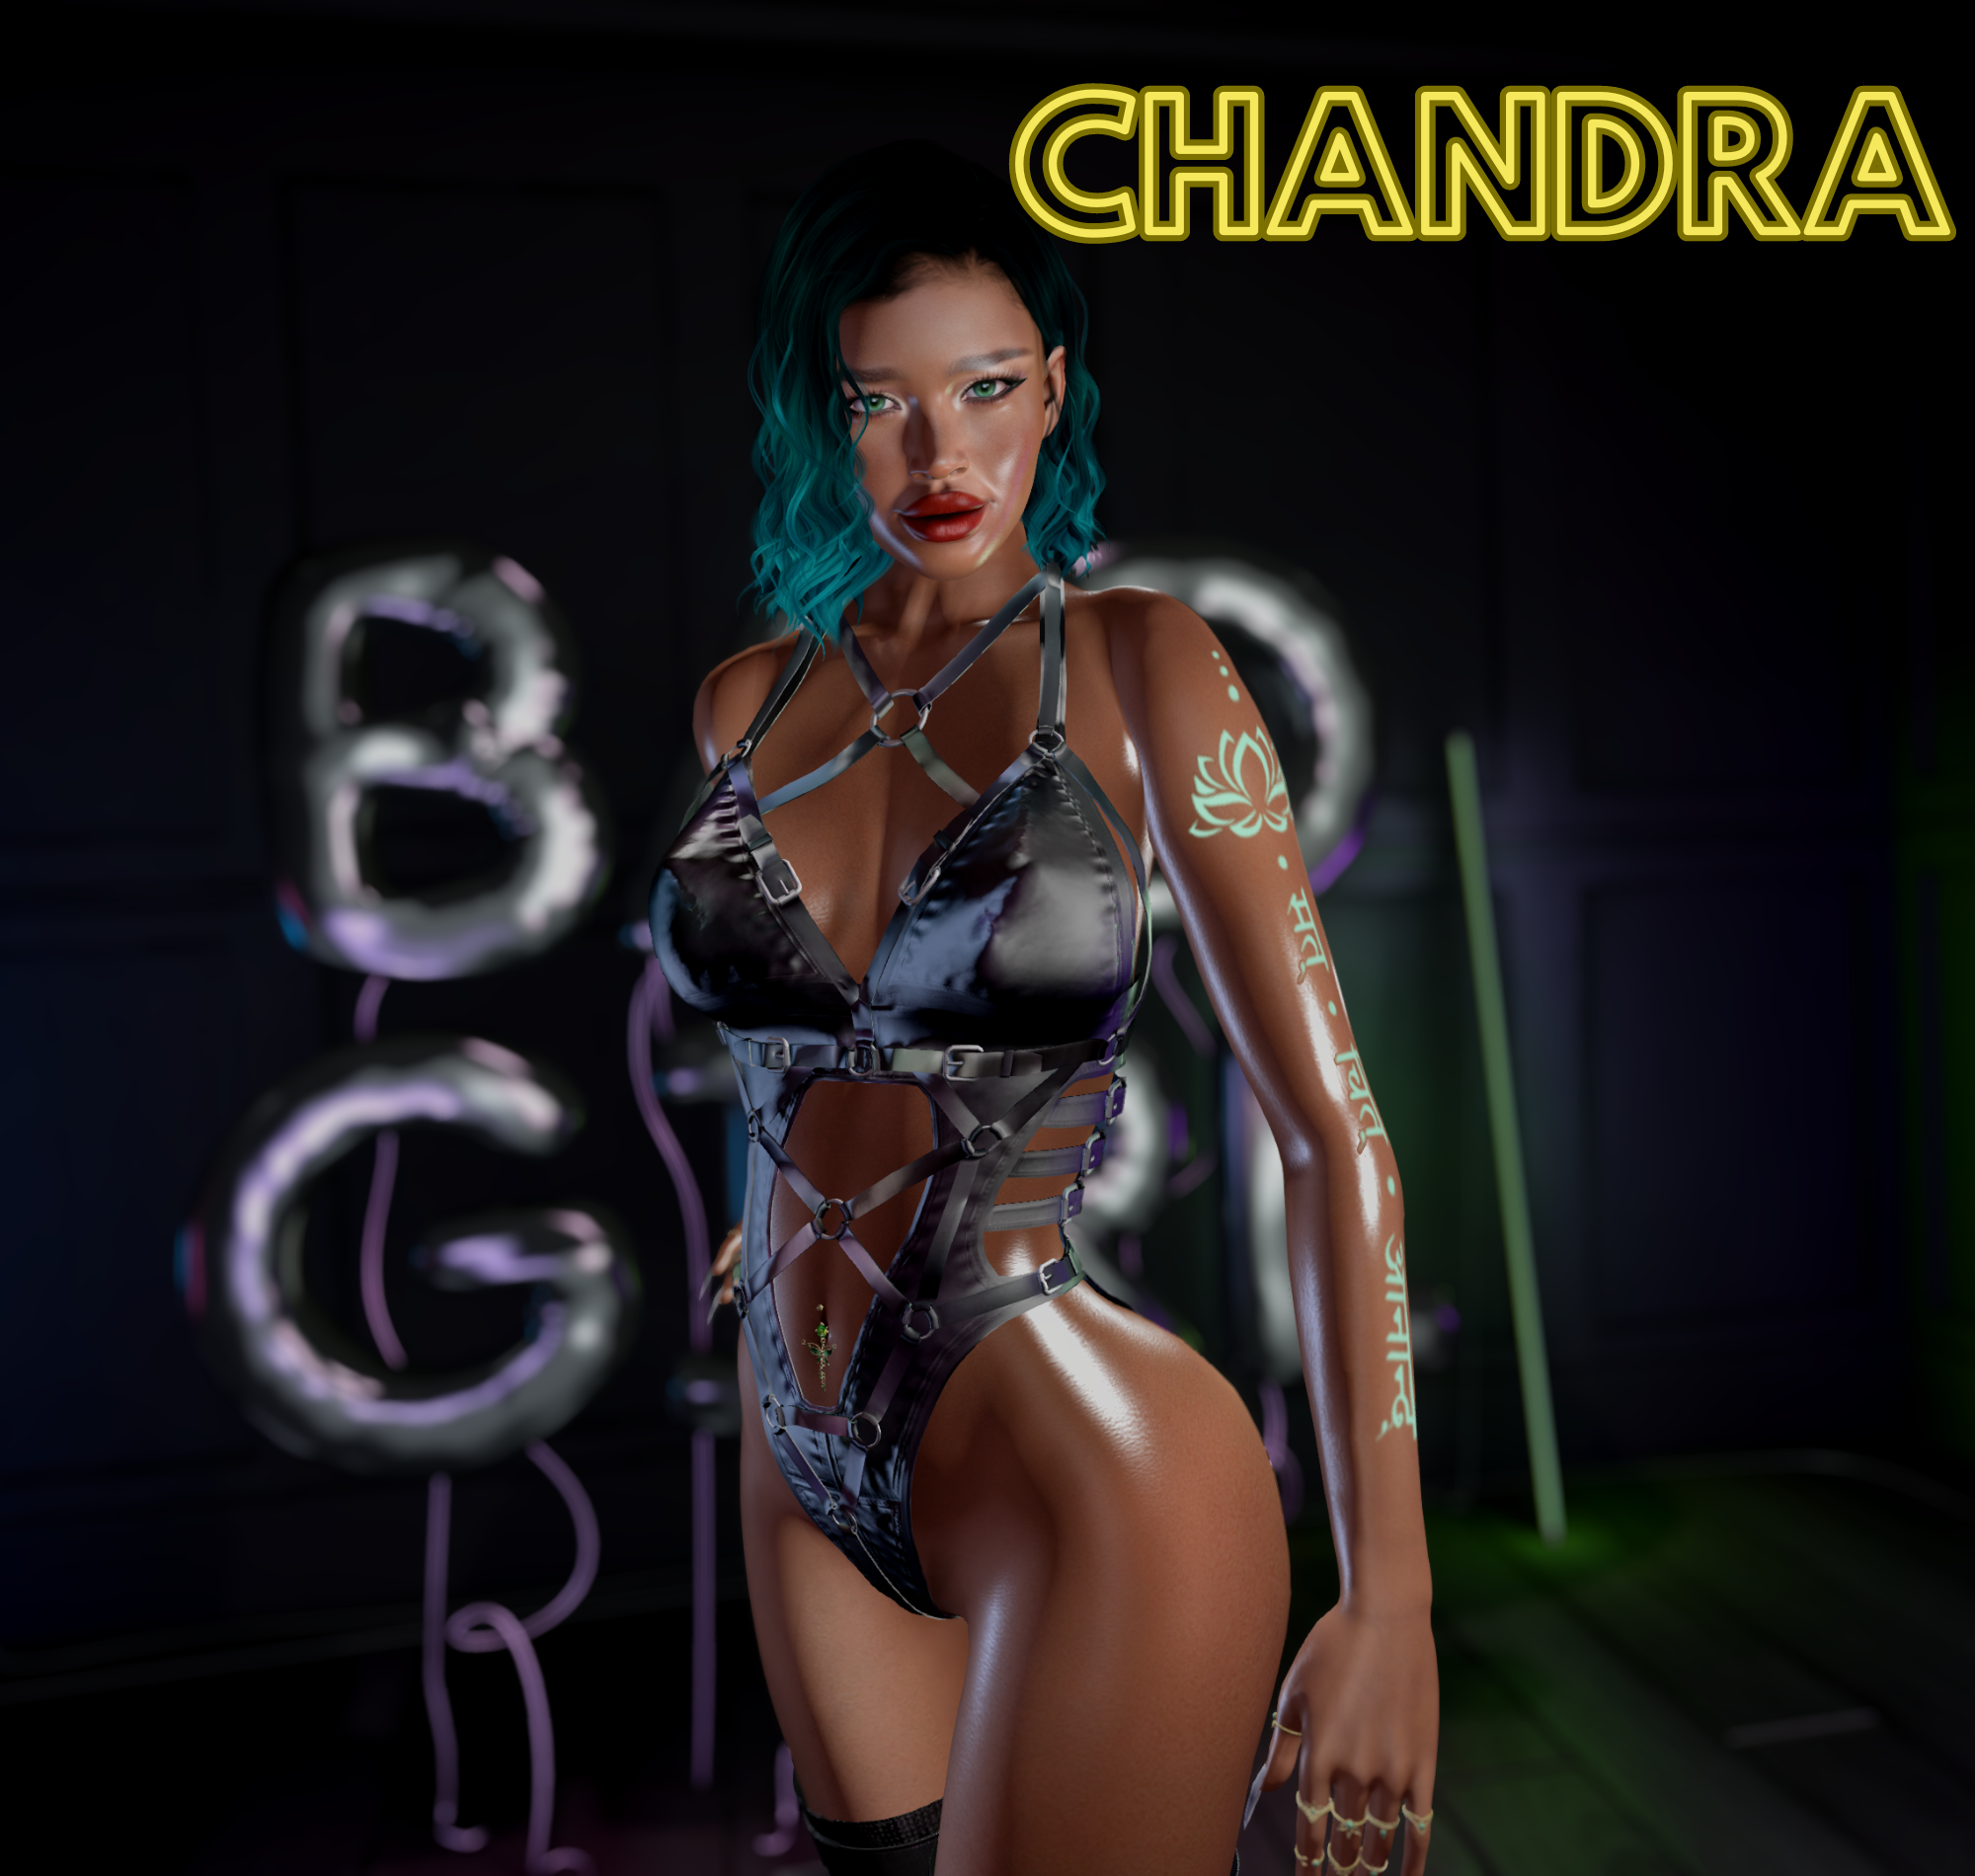 The hottest Second Life escorts on the grid. The X-Sisters Sex bar is the best place to find sex in Second Life.

High Quality Mesh avatars with a real personality behind them. We use Lovense, creativity and fun to drive your wildest desires. 